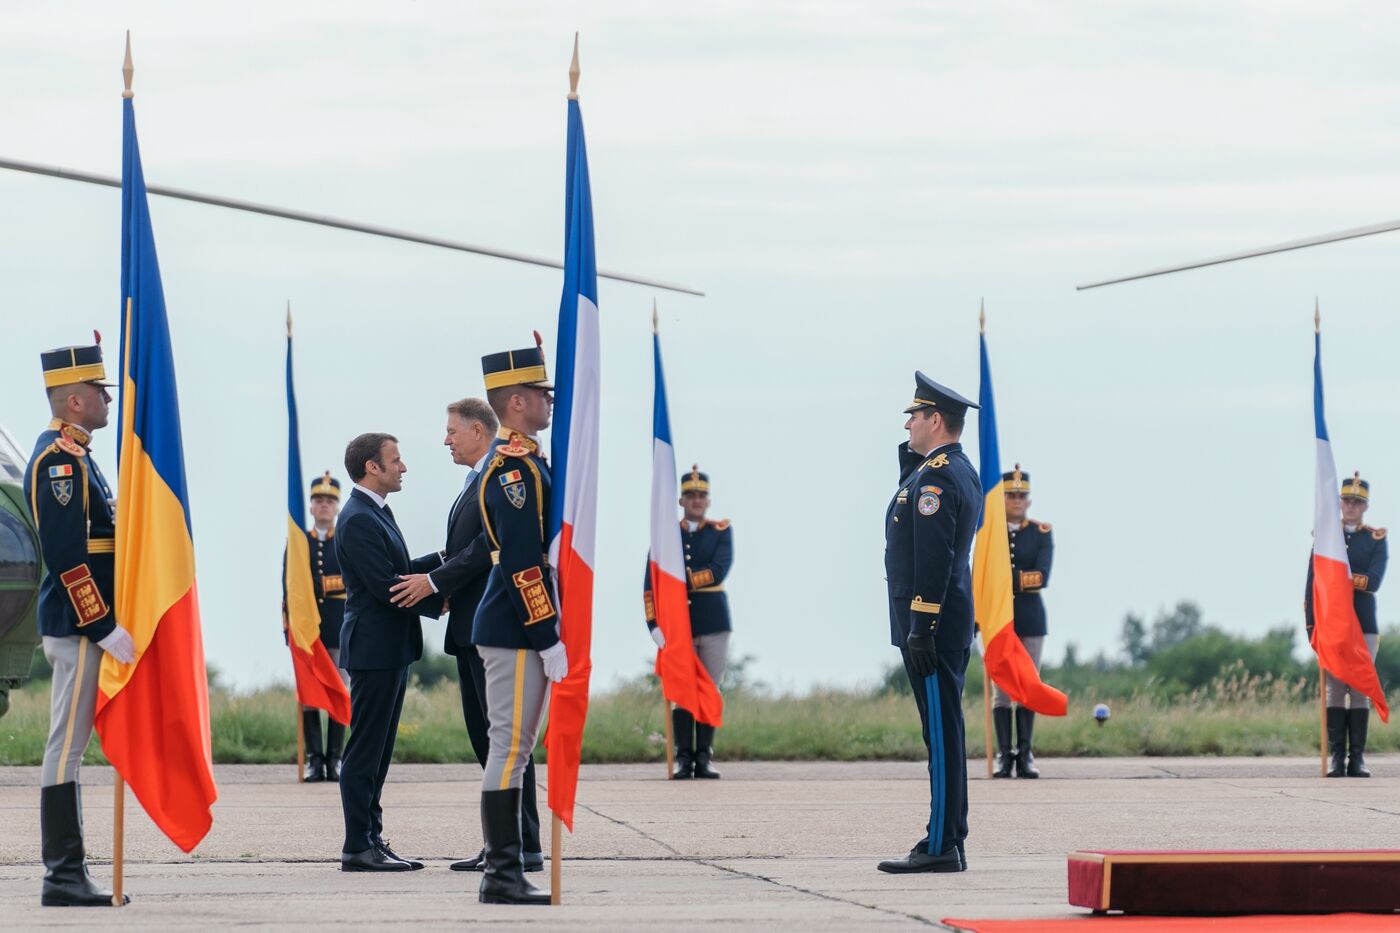 French President Emmanuel Macron Visits Romanian Counterpart Klaus Iohannis and NATO Forces